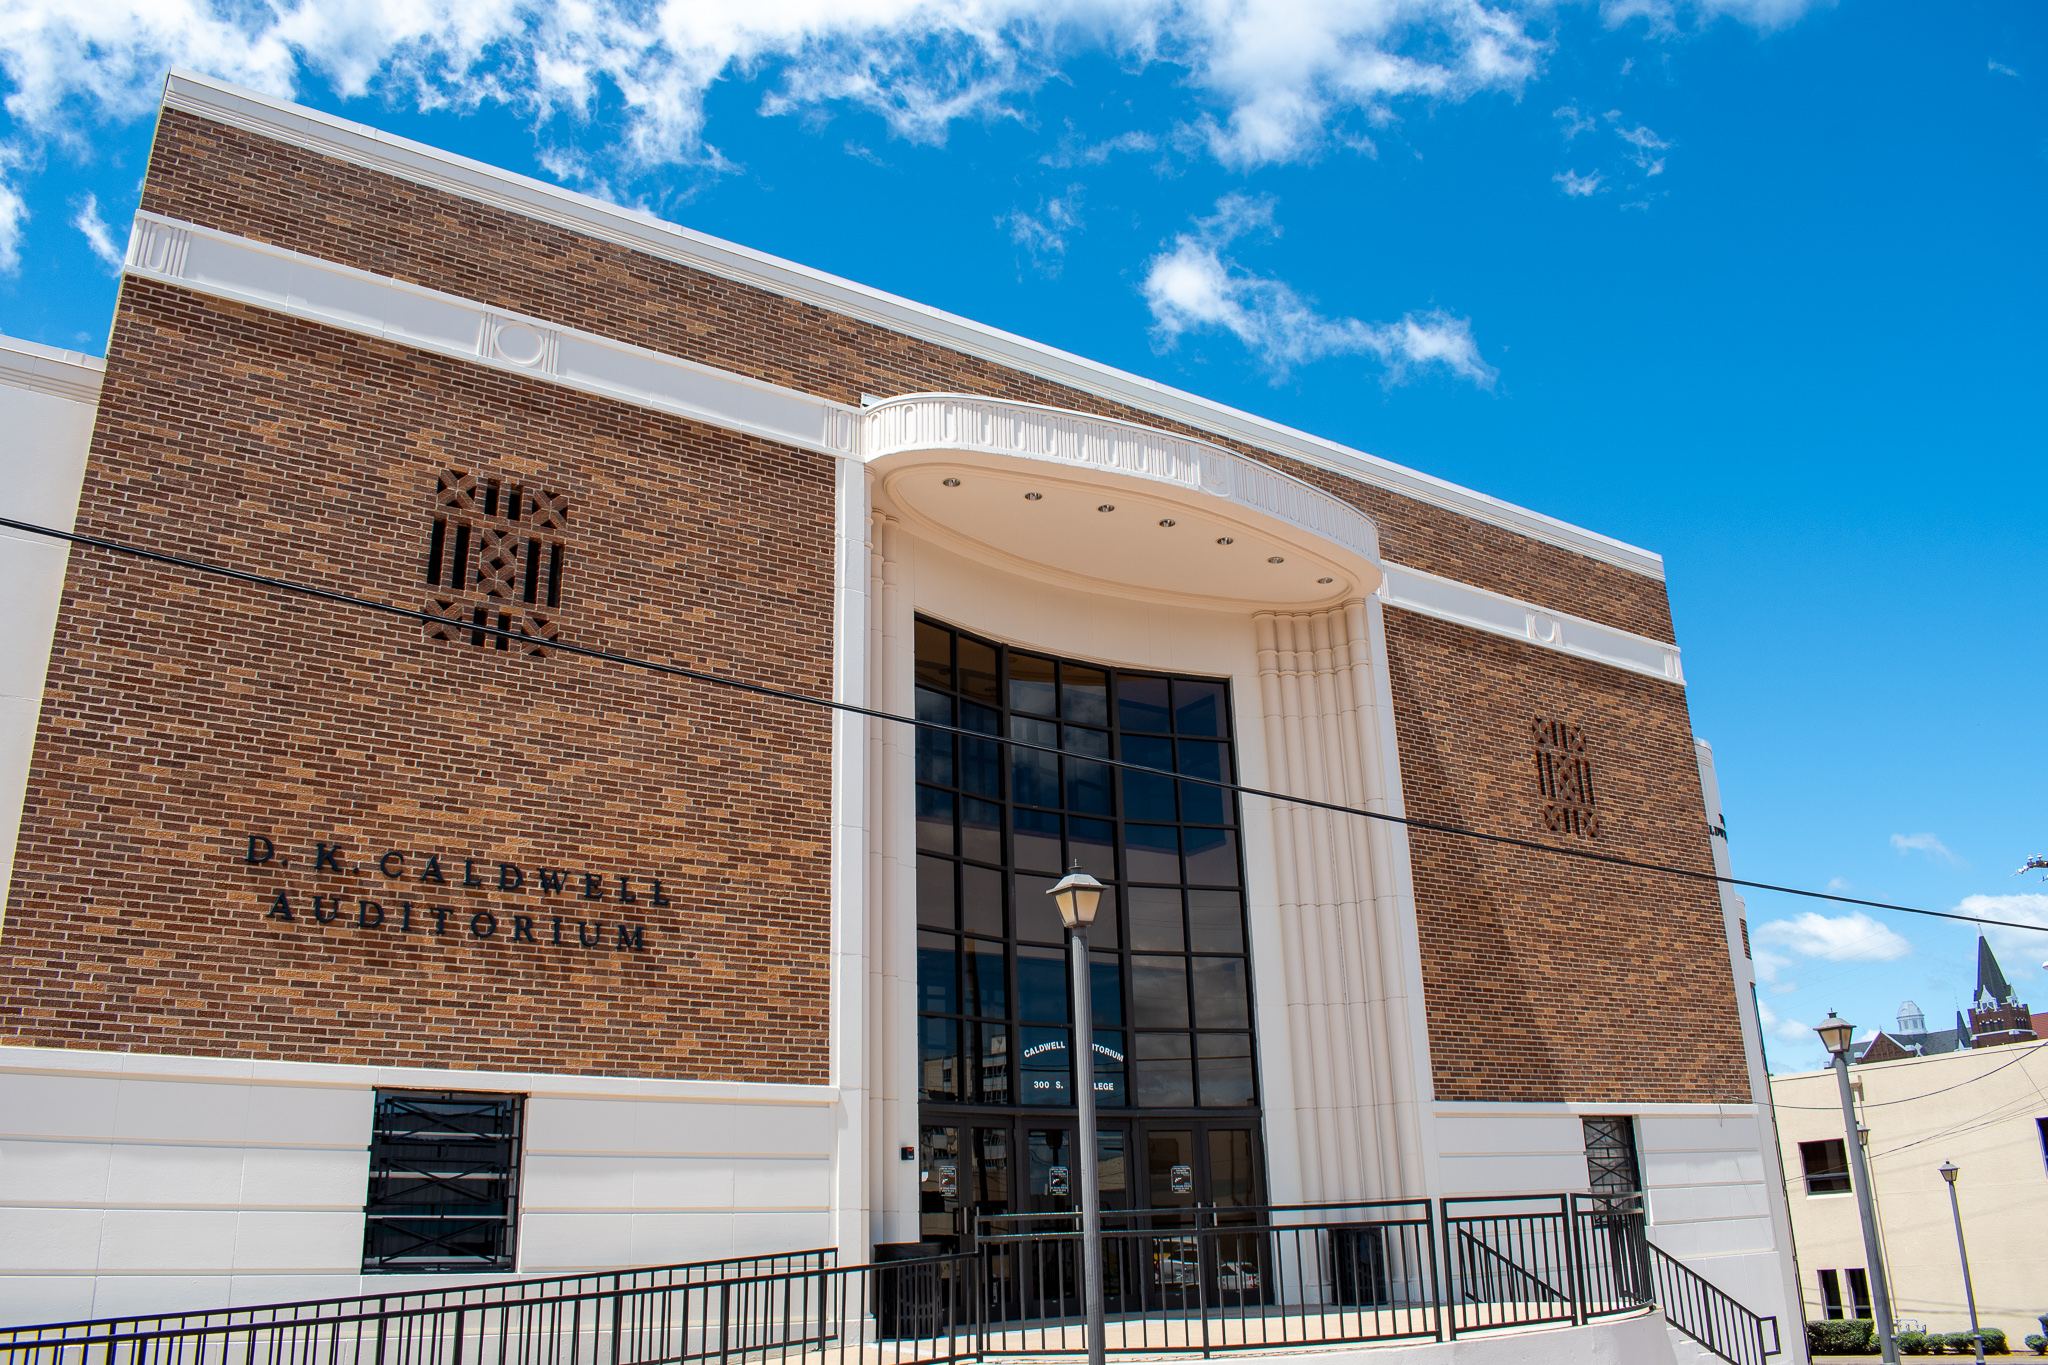 Caldwell Auditorium | An East Texas Legend in Performing Arts